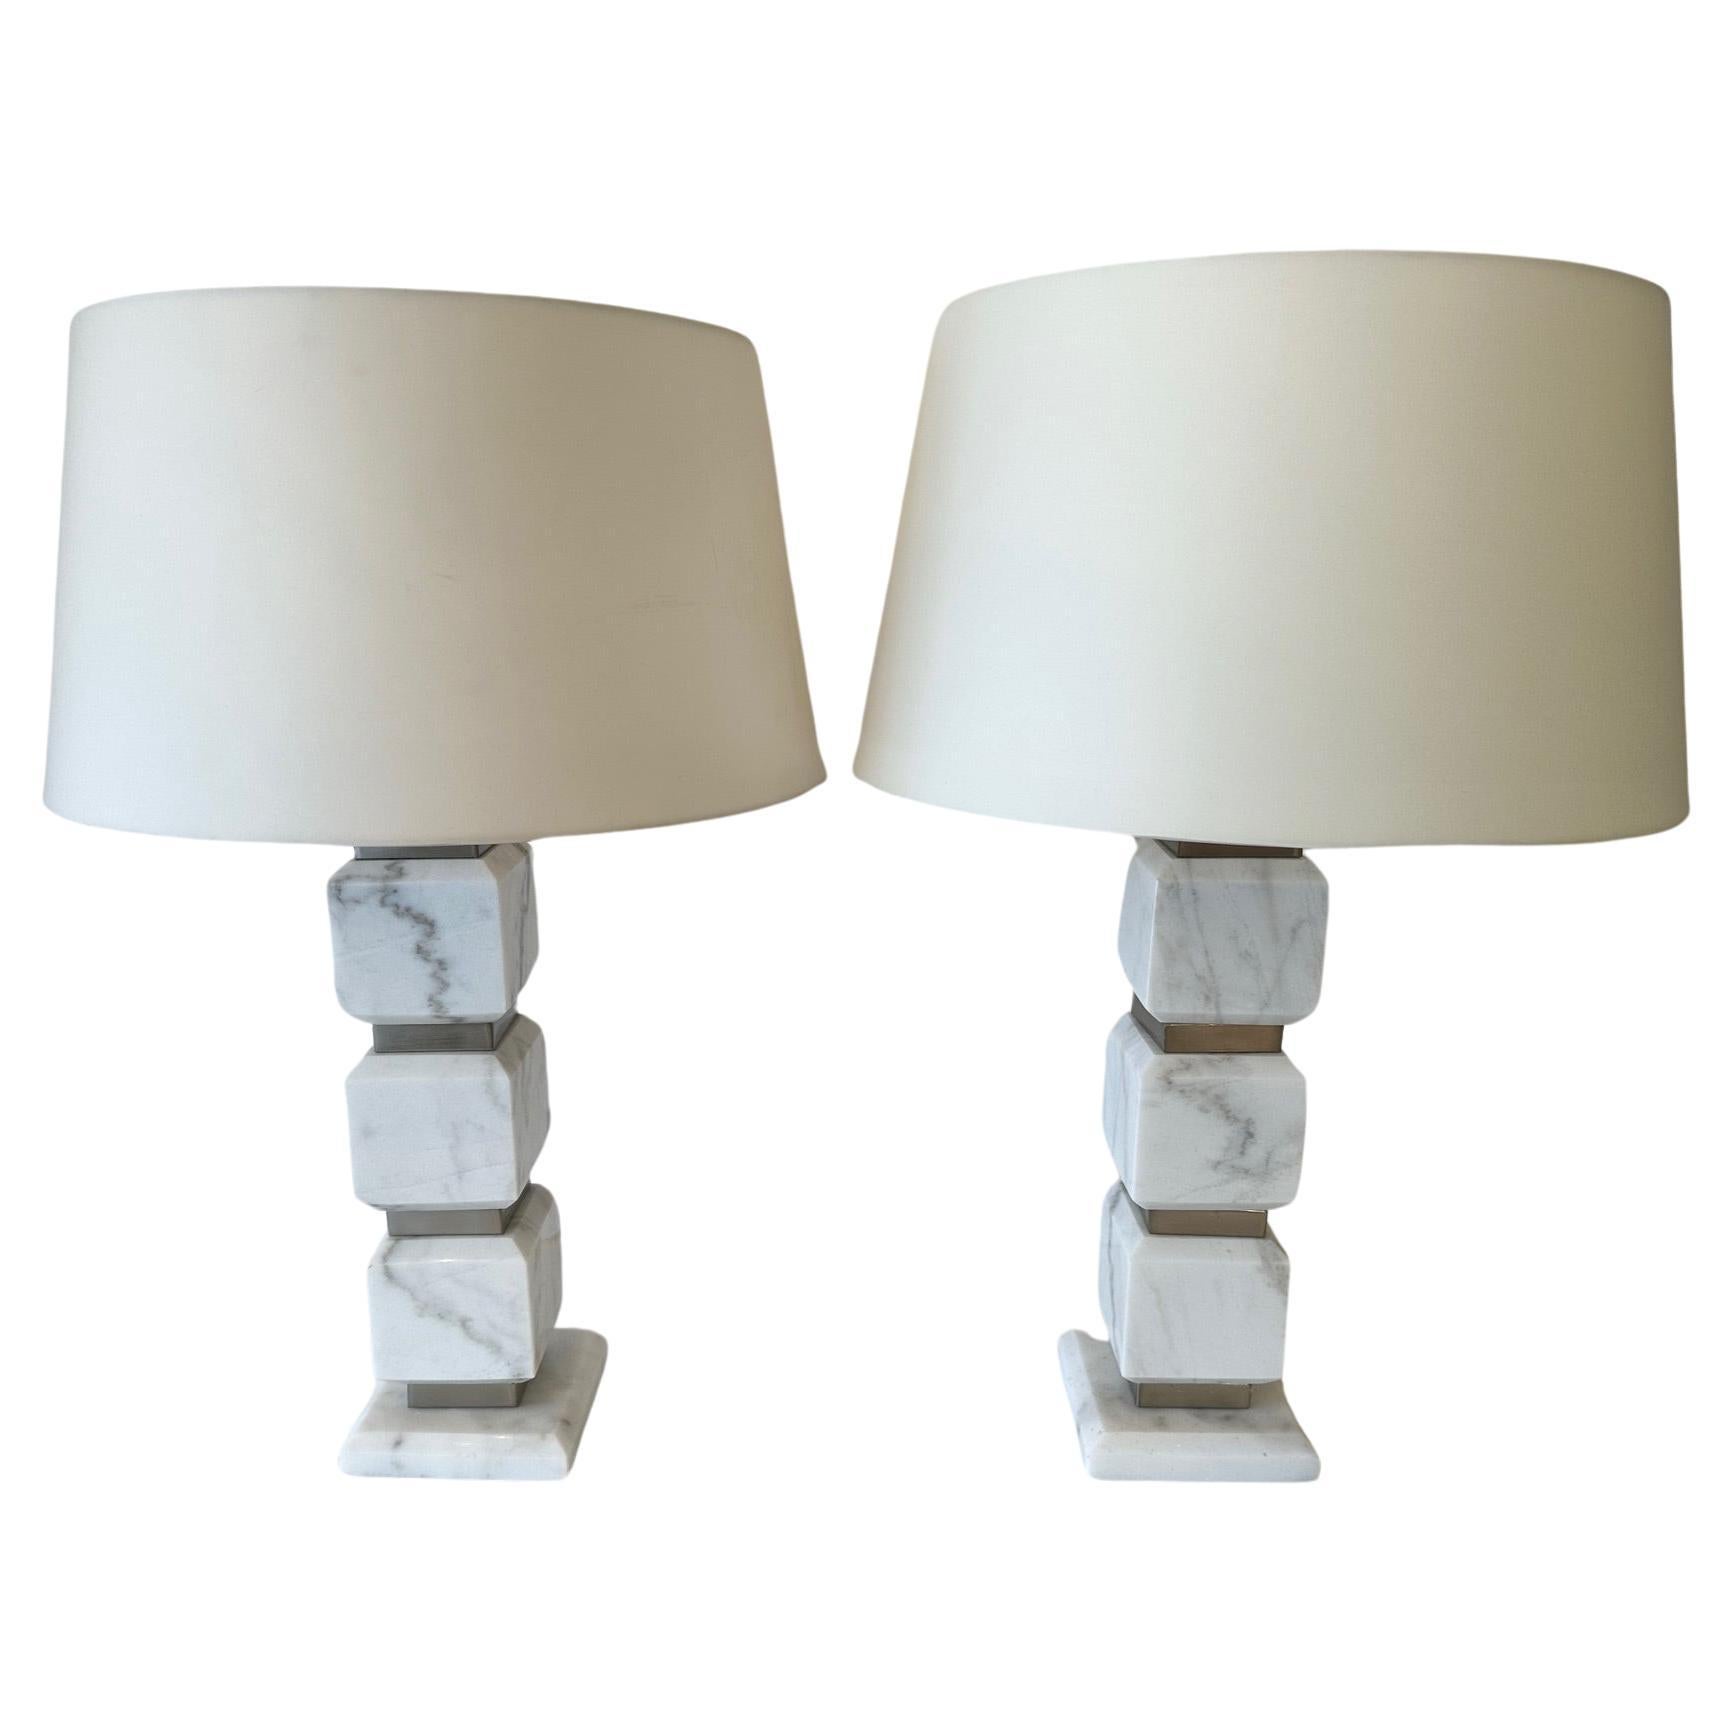 Stunning Modern Pair of Marble & Stainless Steel Cube Table Lamps